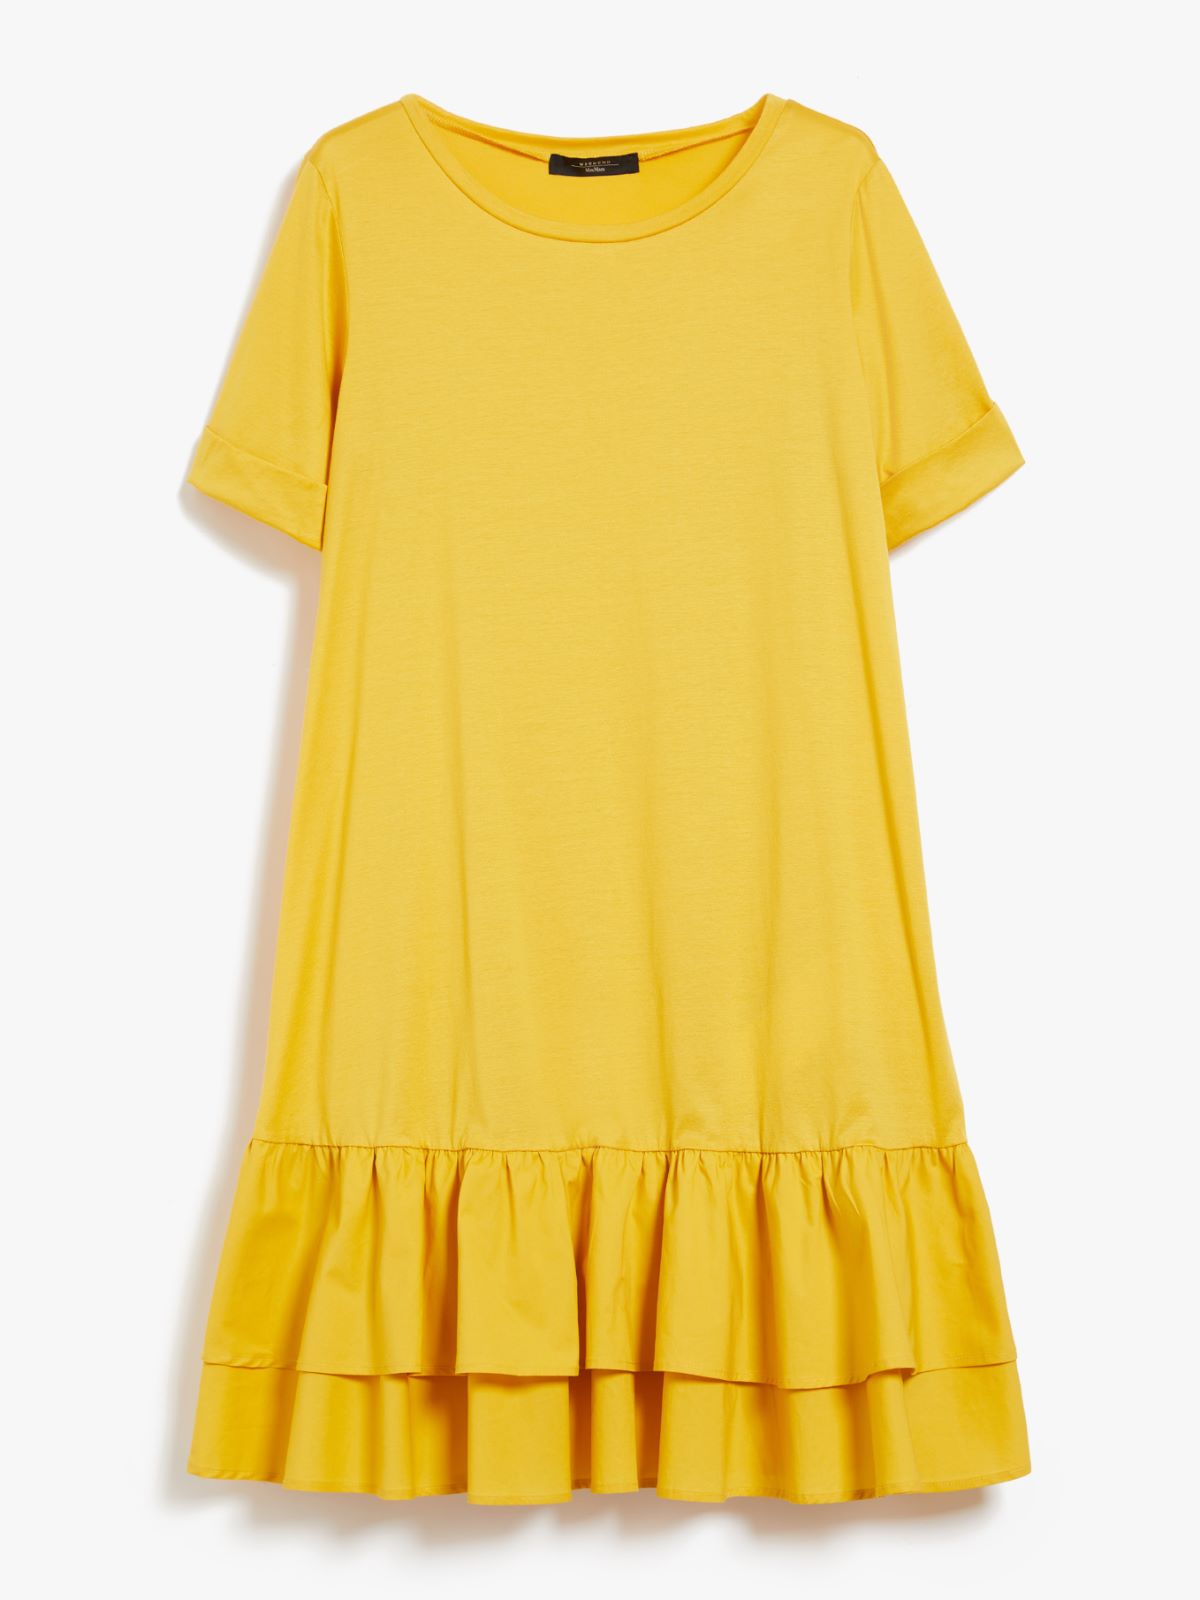 Dress in cotton jersey  - BRIGHT YELLOW - Weekend Max Mara - 5